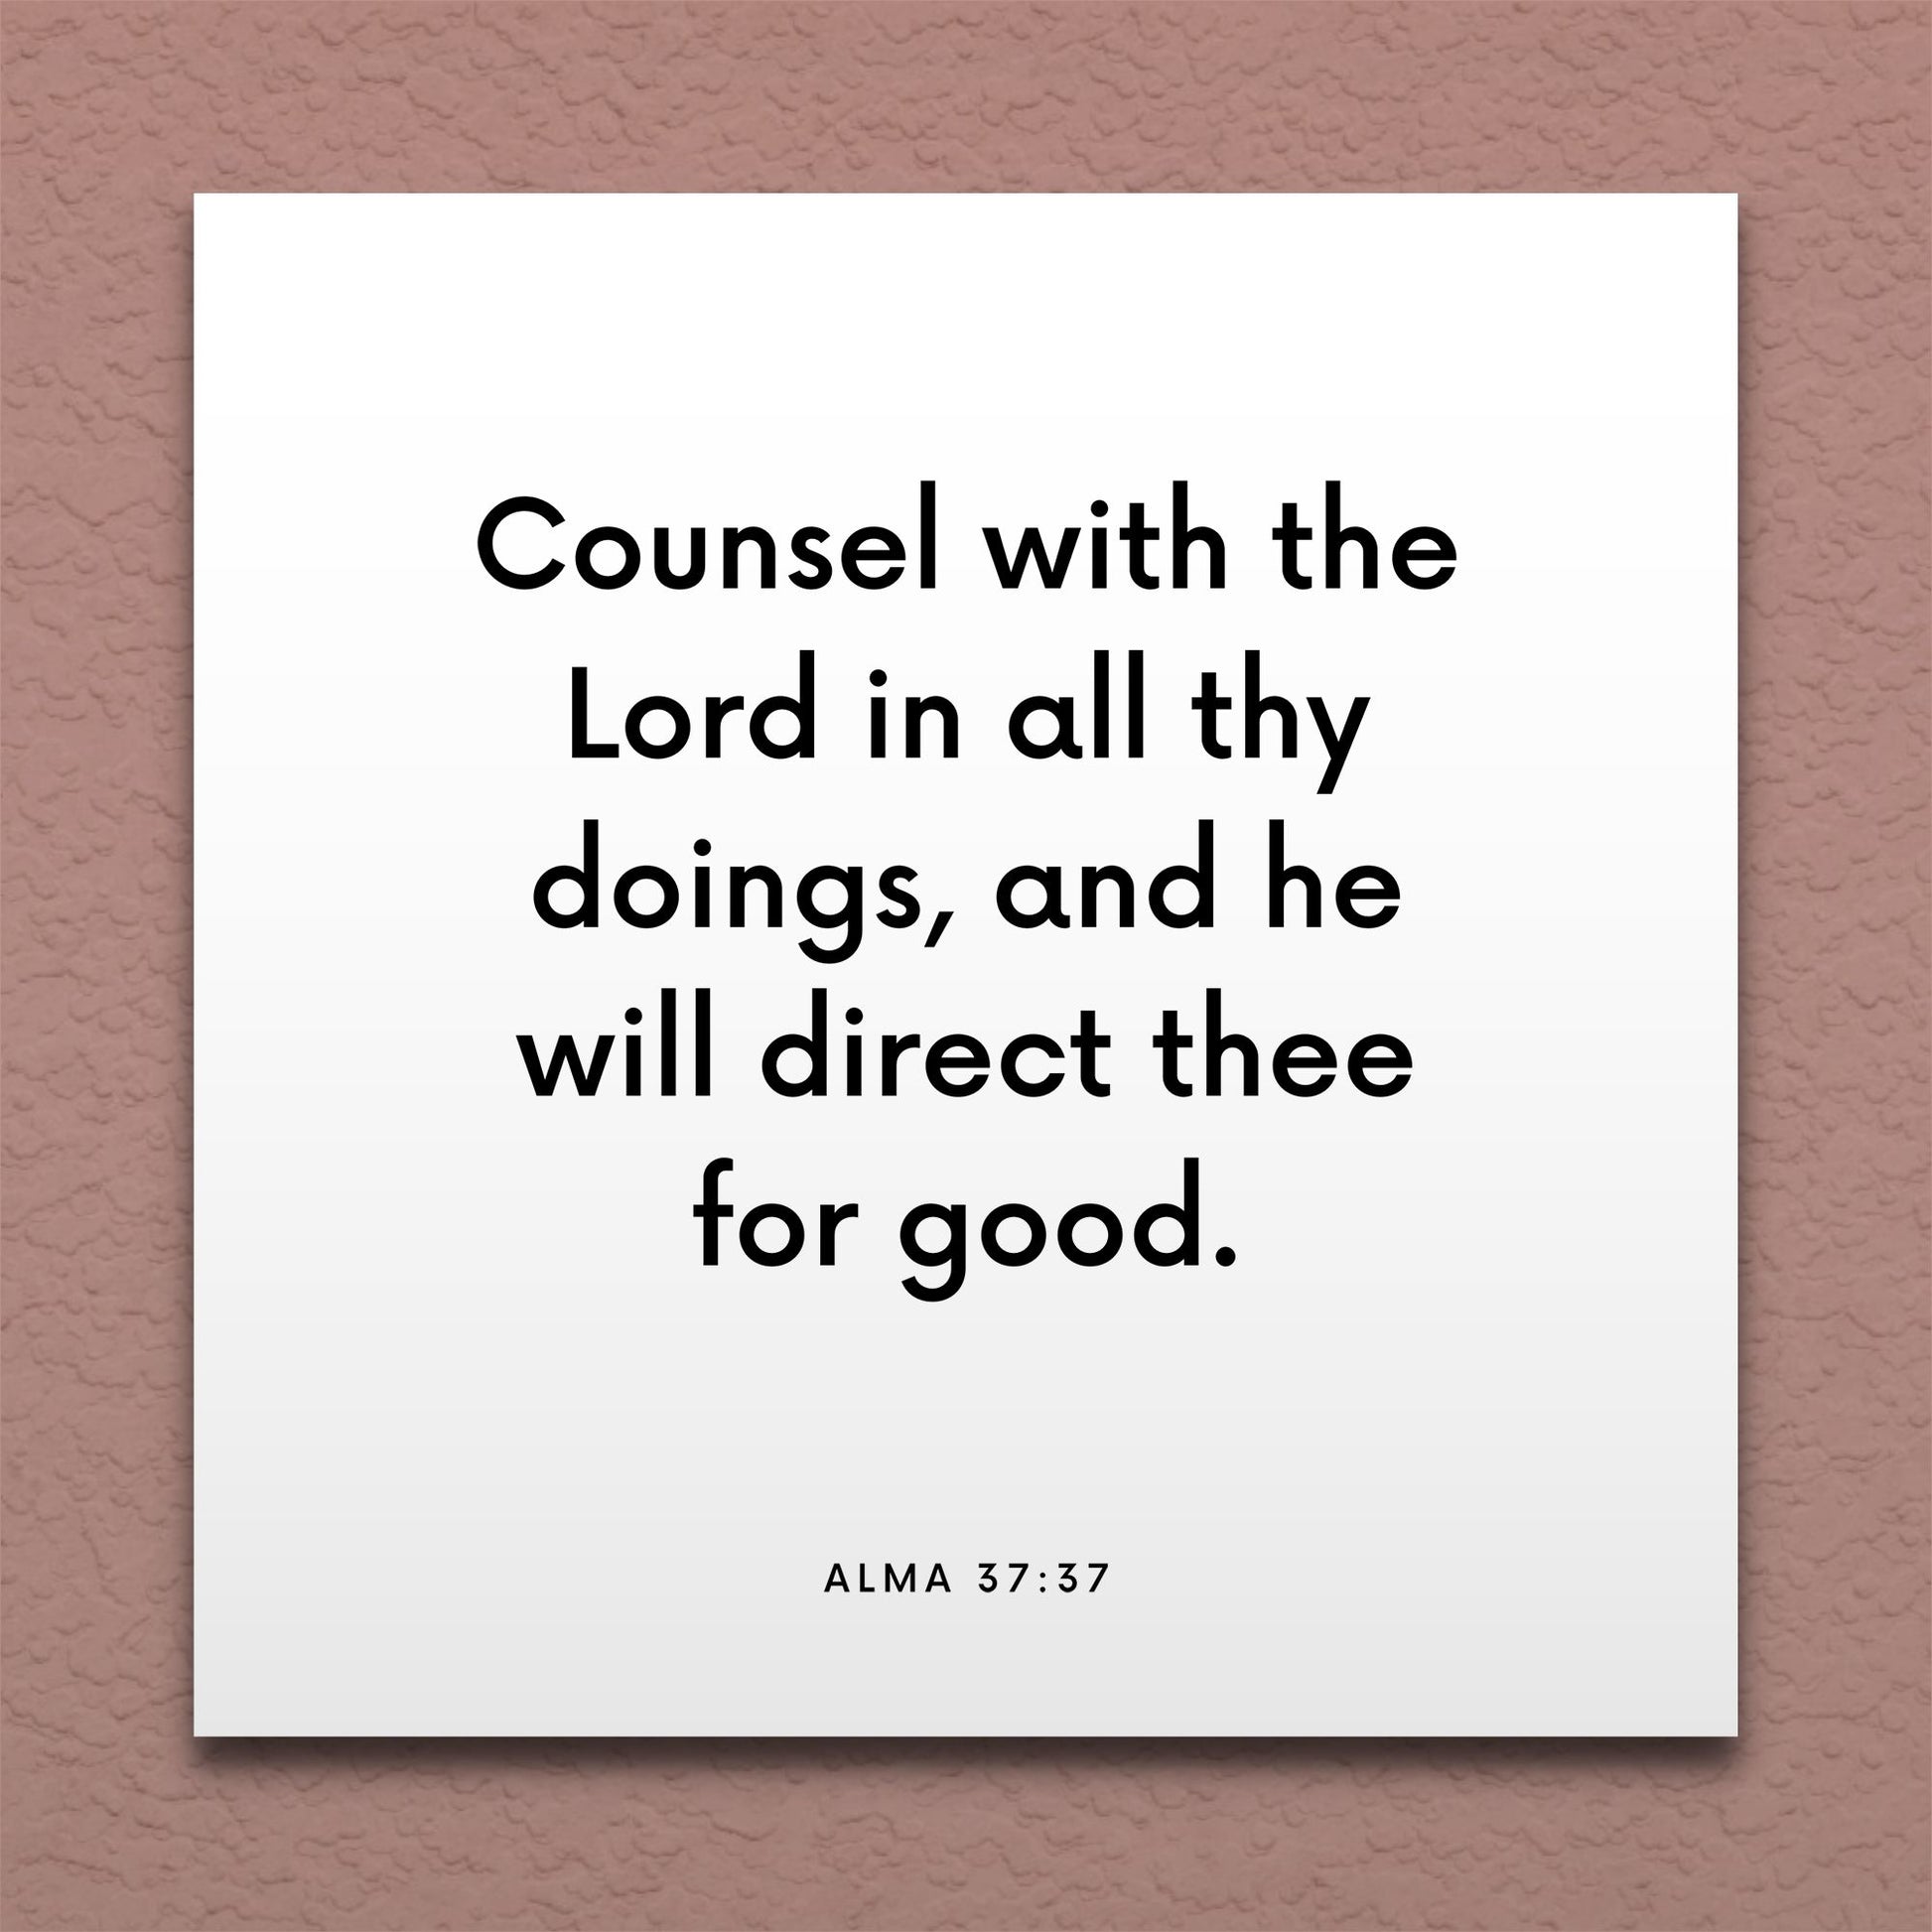 Wall-mounted scripture tile for Alma 37:37 - "Counsel with the Lord in all thy doings"